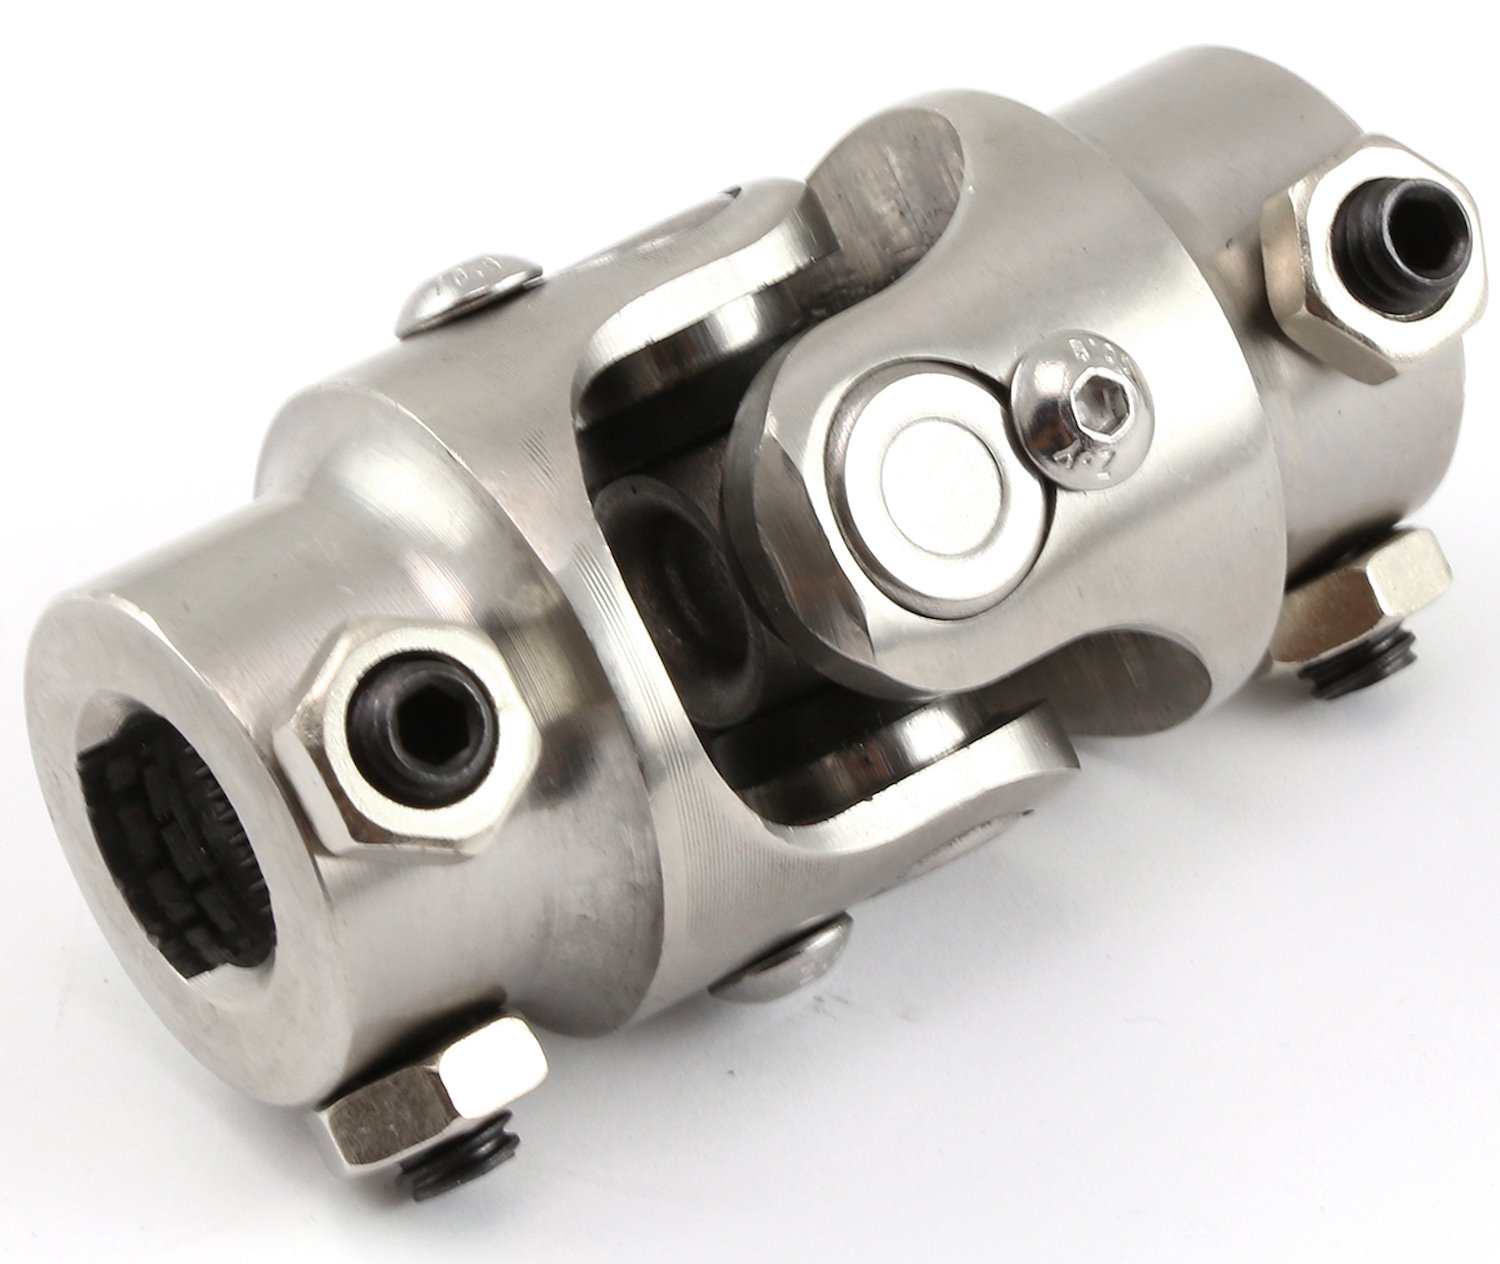 Stainless Steel Double D U-Joint 3/4" DD x 3/4" DD